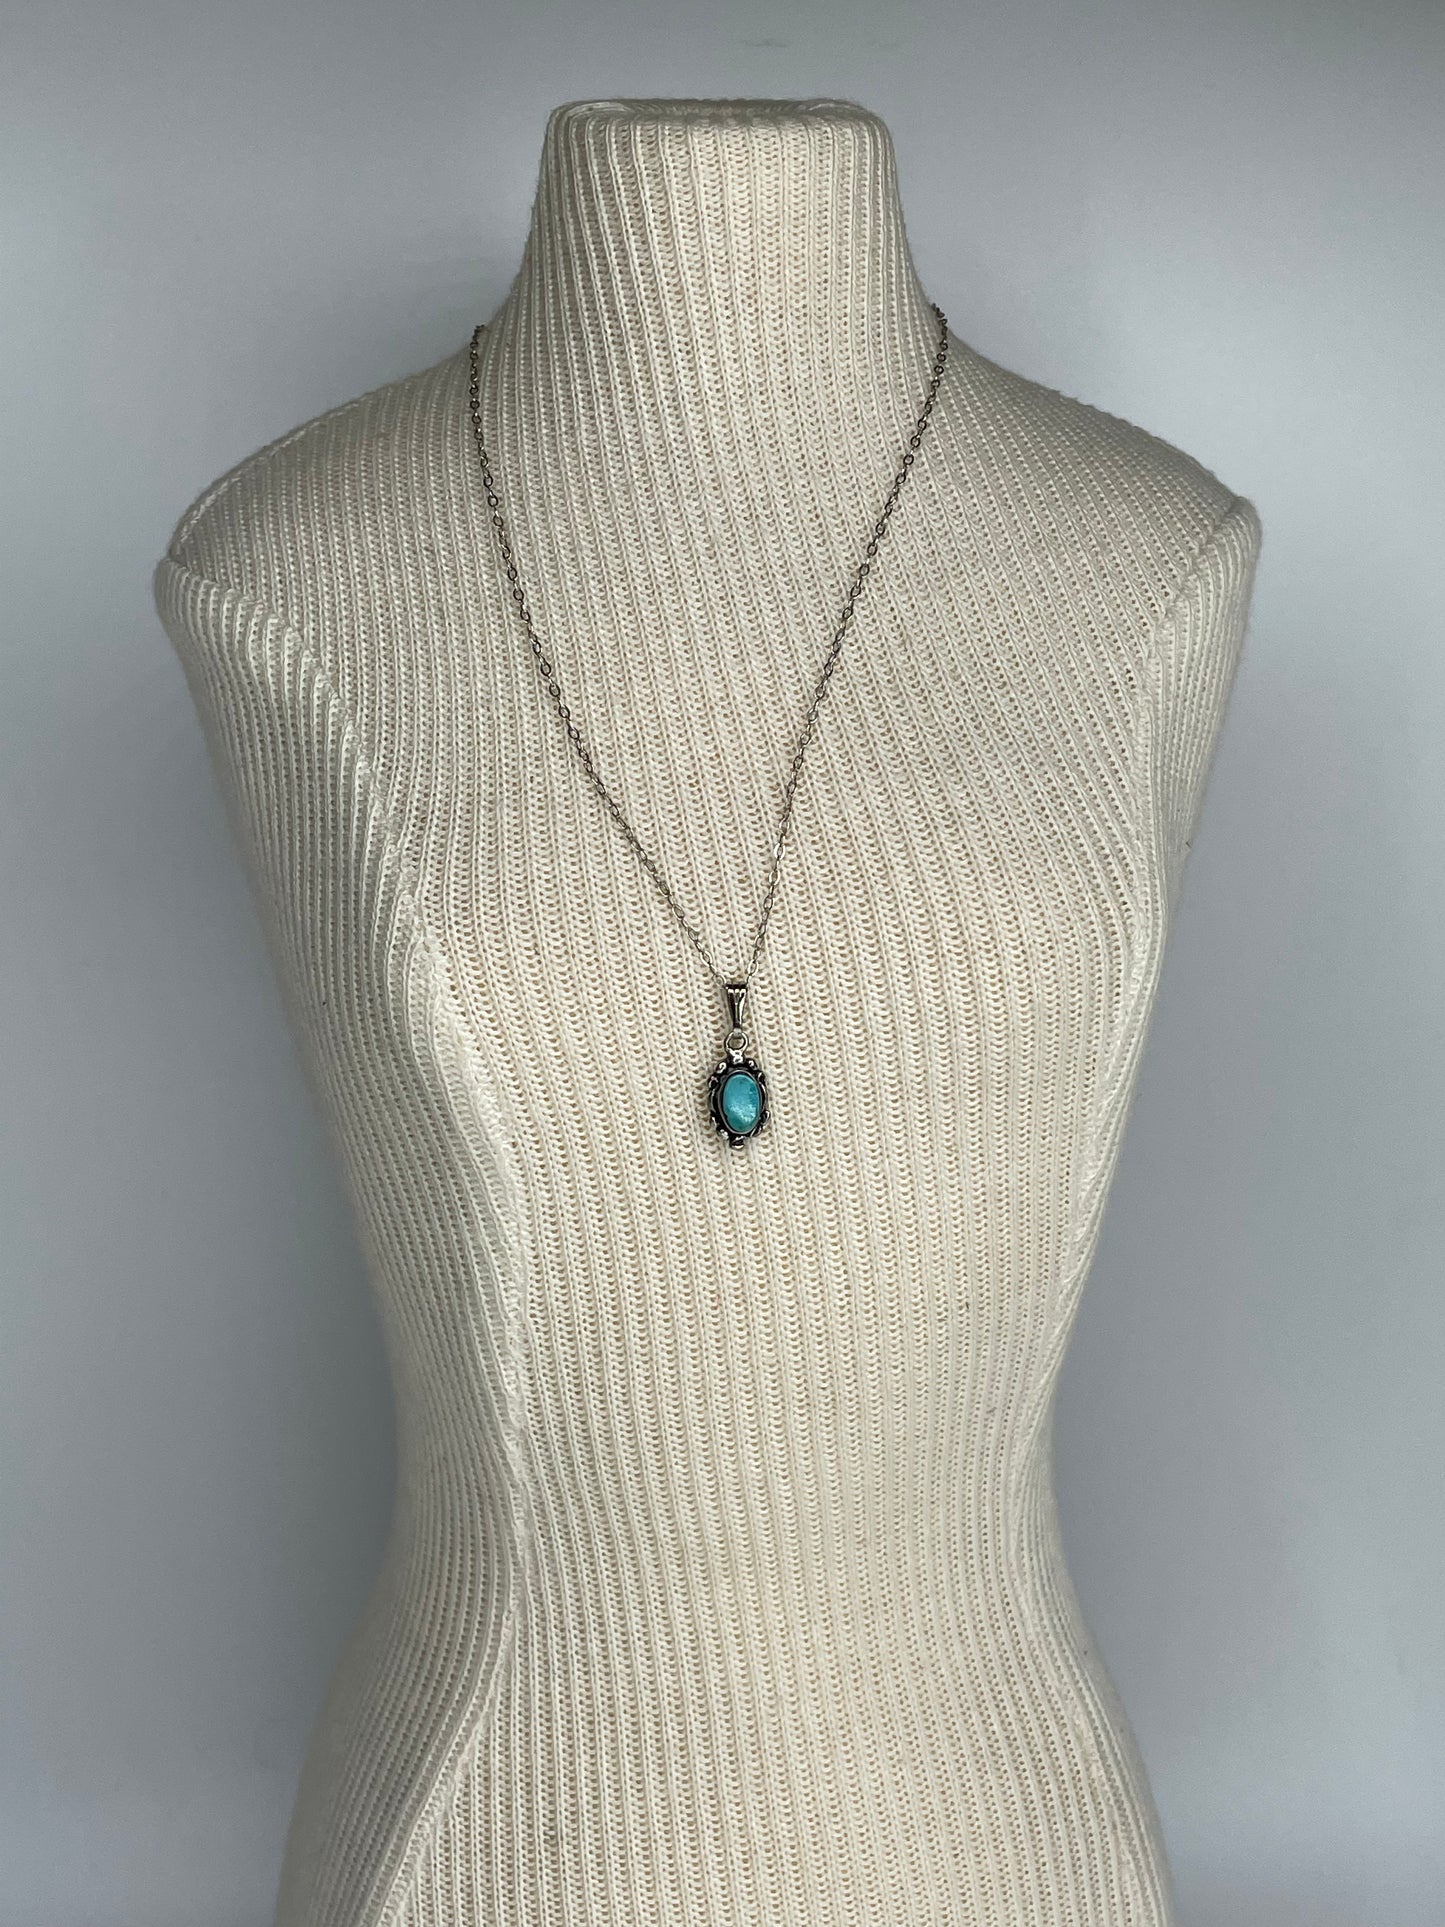 Vintage Small Turquoise Sterling Silver Pendant W/ Sterling Chain